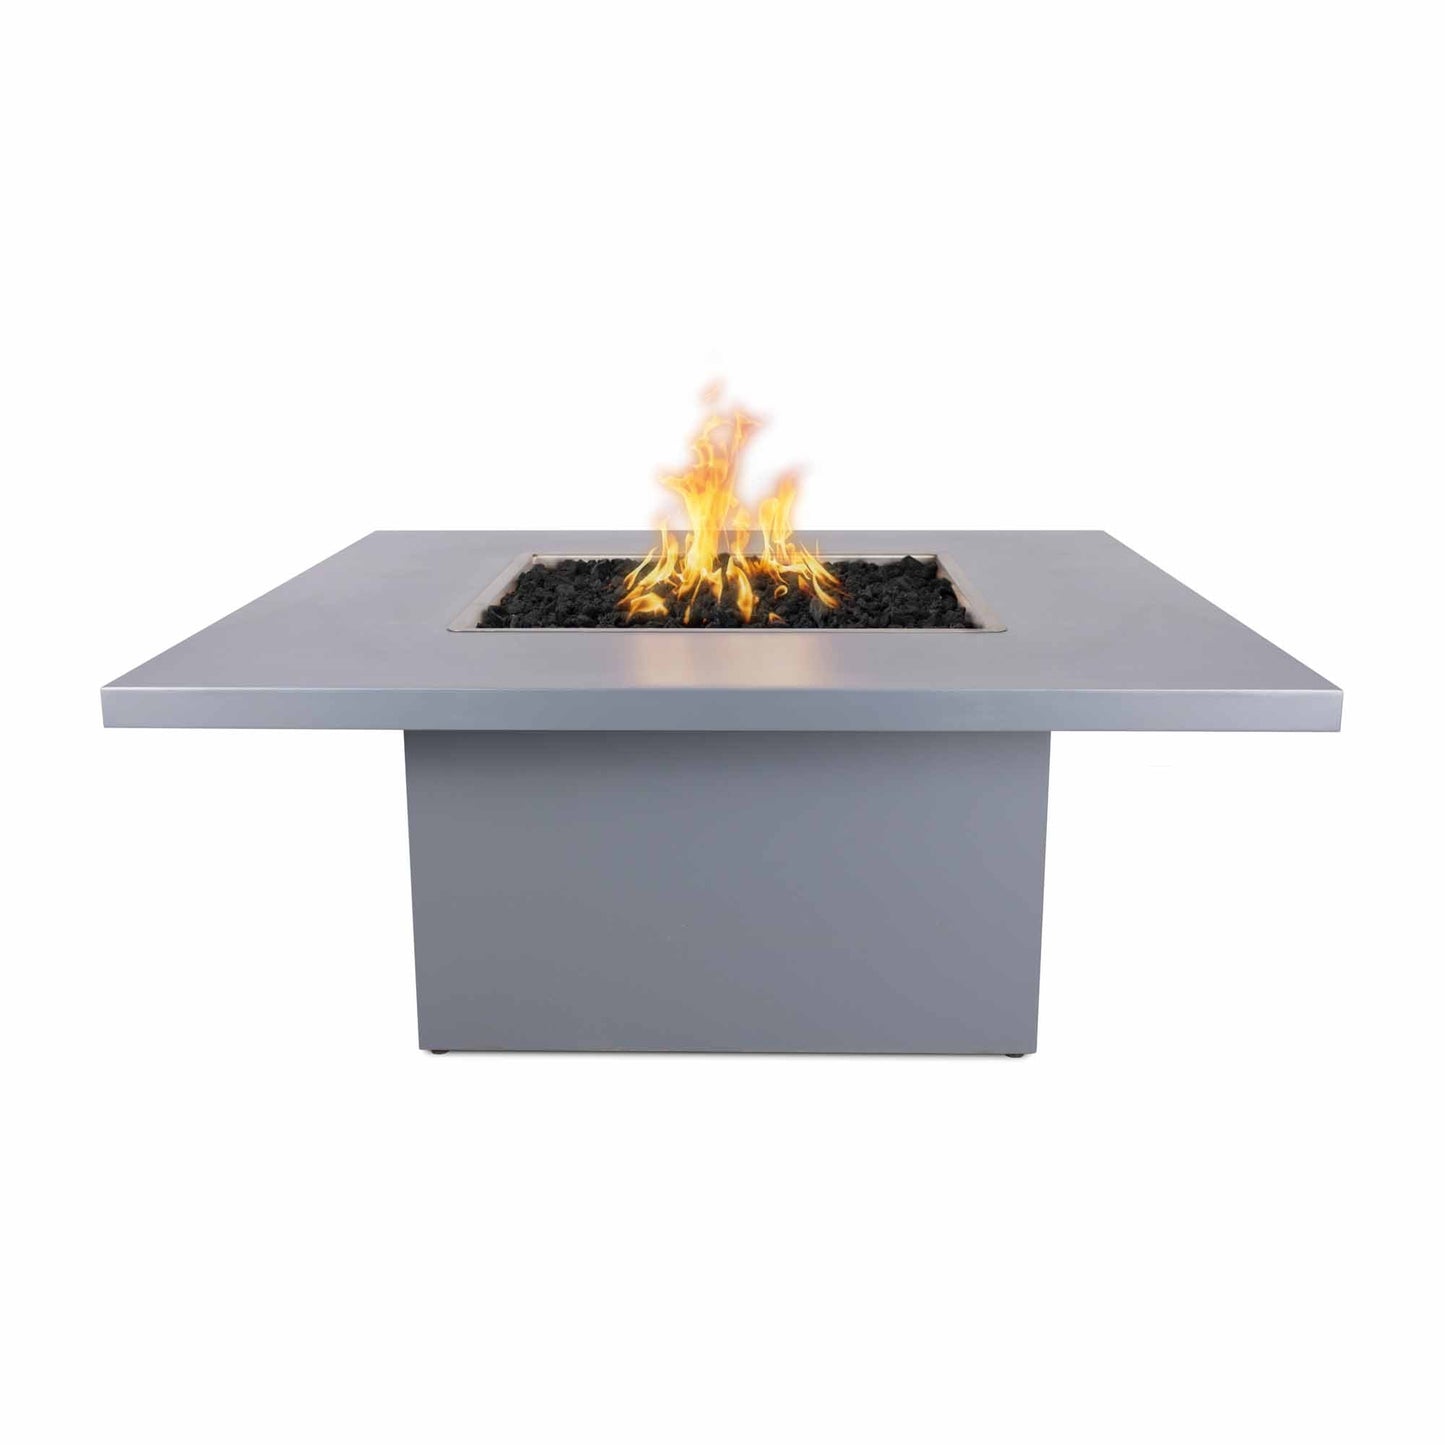 The Outdoor Plus Square Bella 60" Hammered Copper Liquid Propane Fire Pit with Flame Sense with Spark Ignition